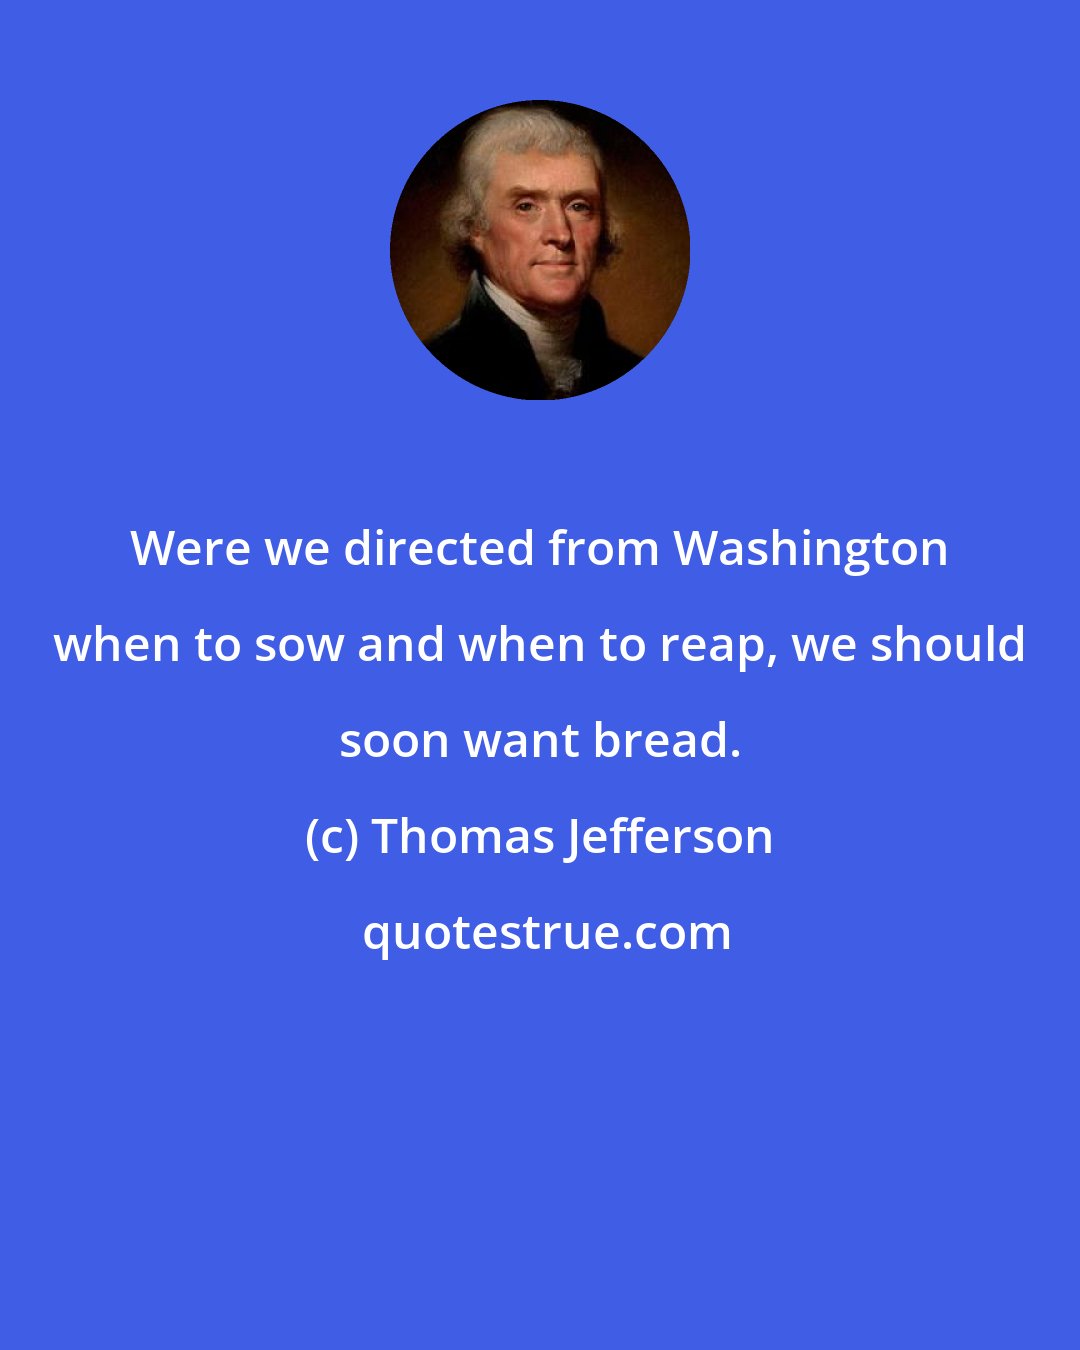 Thomas Jefferson: Were we directed from Washington when to sow and when to reap, we should soon want bread.